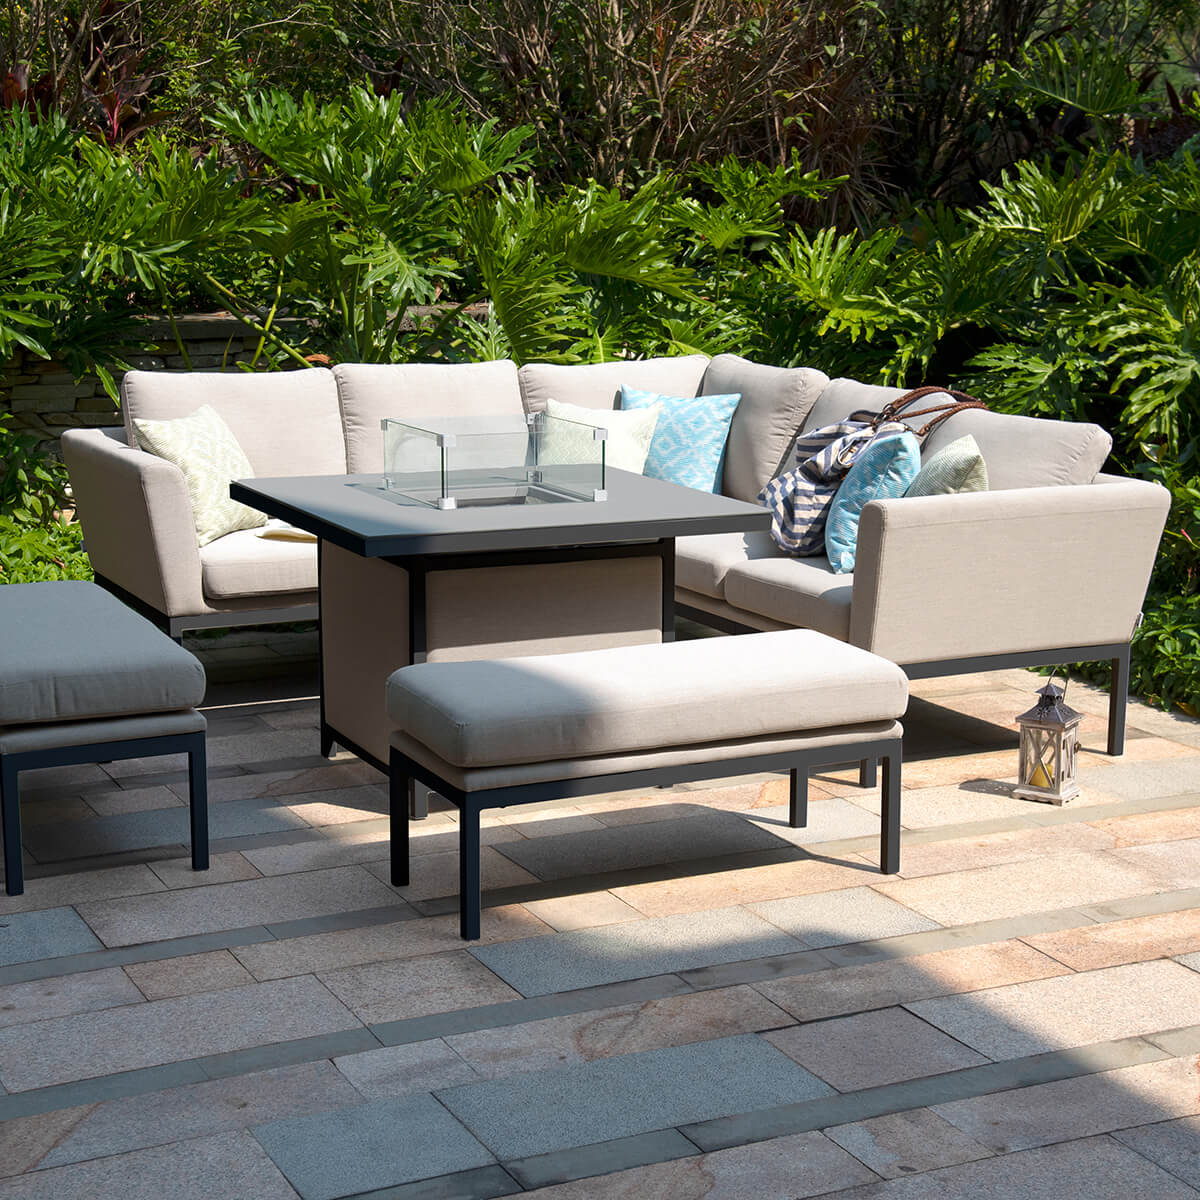 Maze - Outdoor Fabric Pulse Square Corner Dining Set with Fire Pit Table - Oatmeal